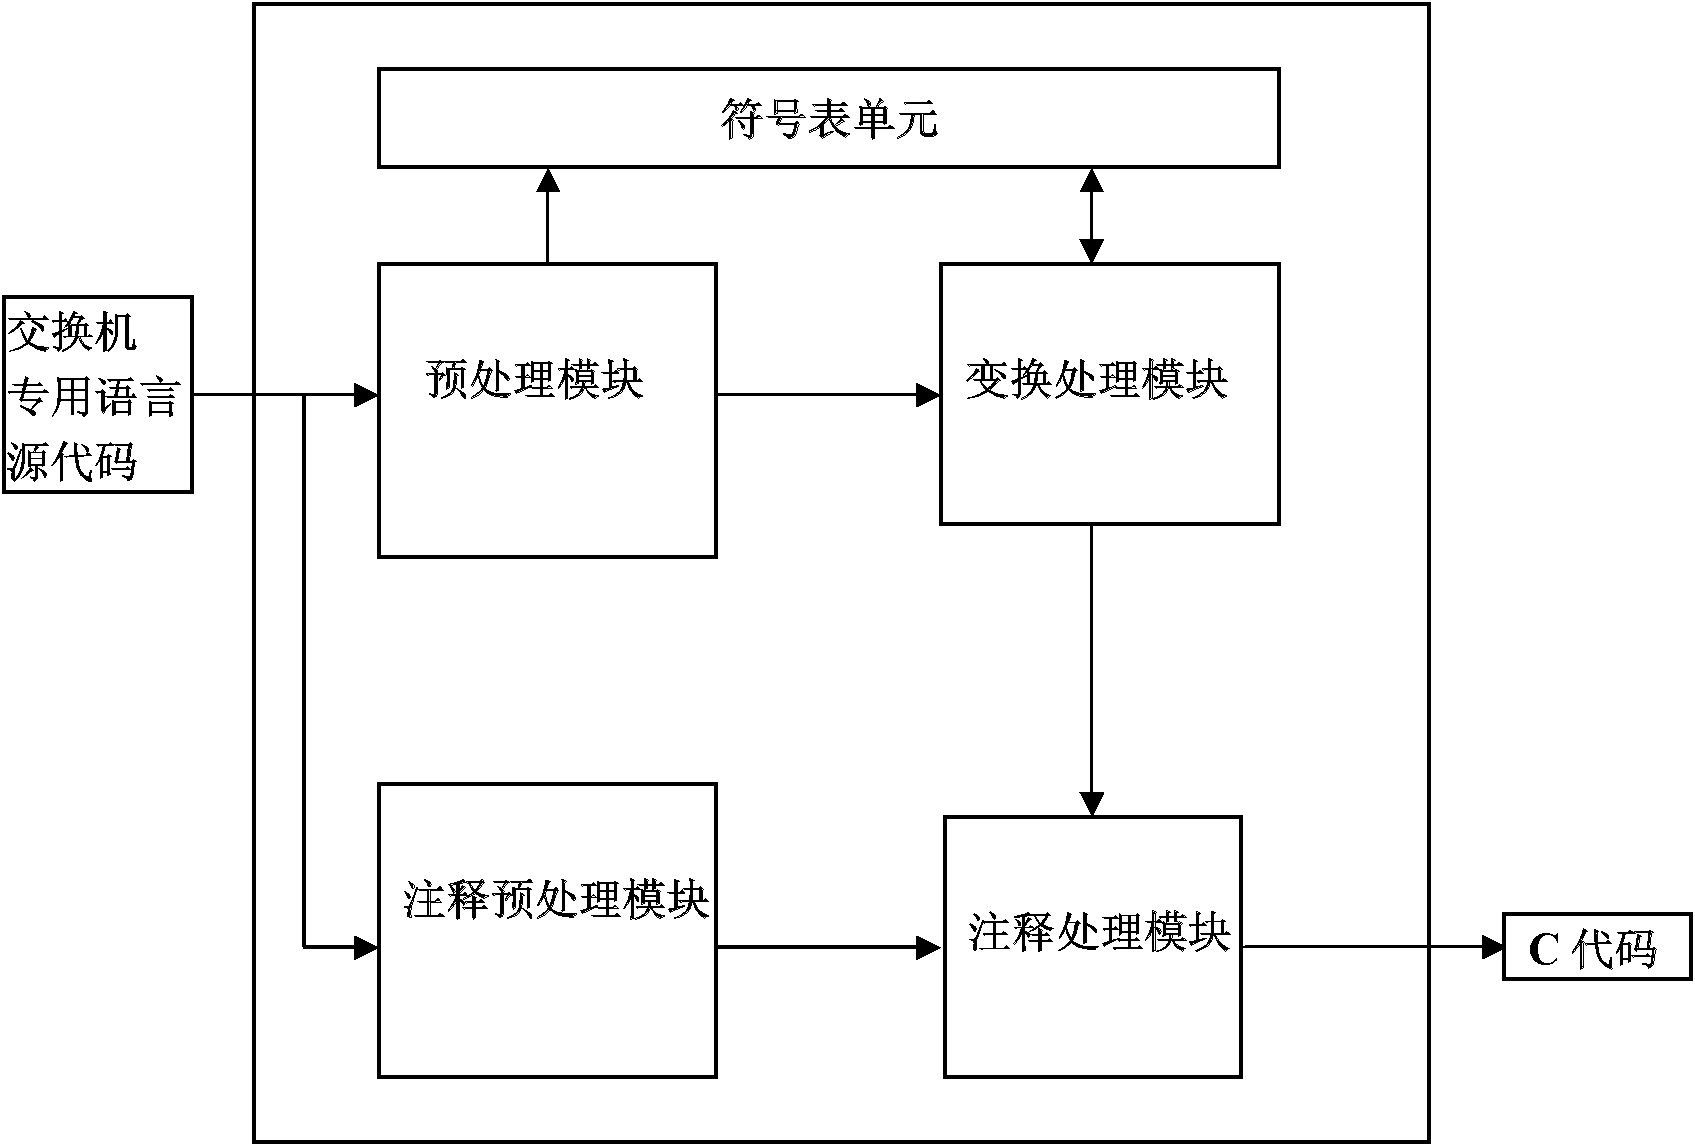 Method for transforming switch special language into C language